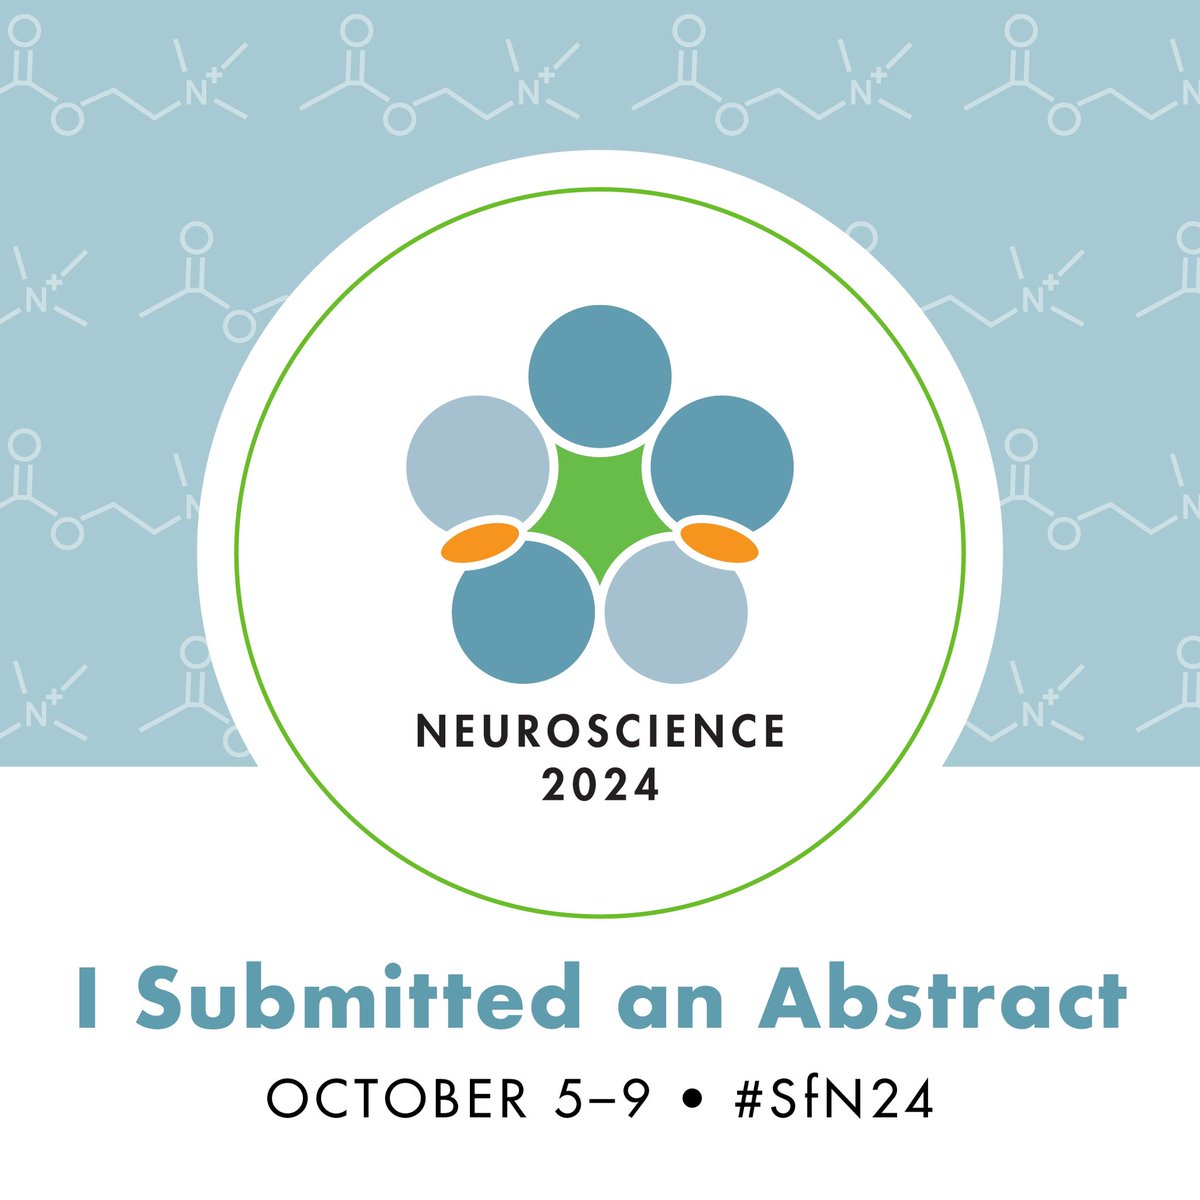 Submitted an abstract to present a poster at @SfNtweets on behalf of our 'OCD & the Brain' project! 🌟➡️ ocdandthebrain.com Cannot wait to bring this #RealOCD advocacy & outreach to #SfN24 - see y'all in Chicago this October, woohoo! 🧠🎉 ⭐️@TobiasUHauser @IOCDF @OCDAction